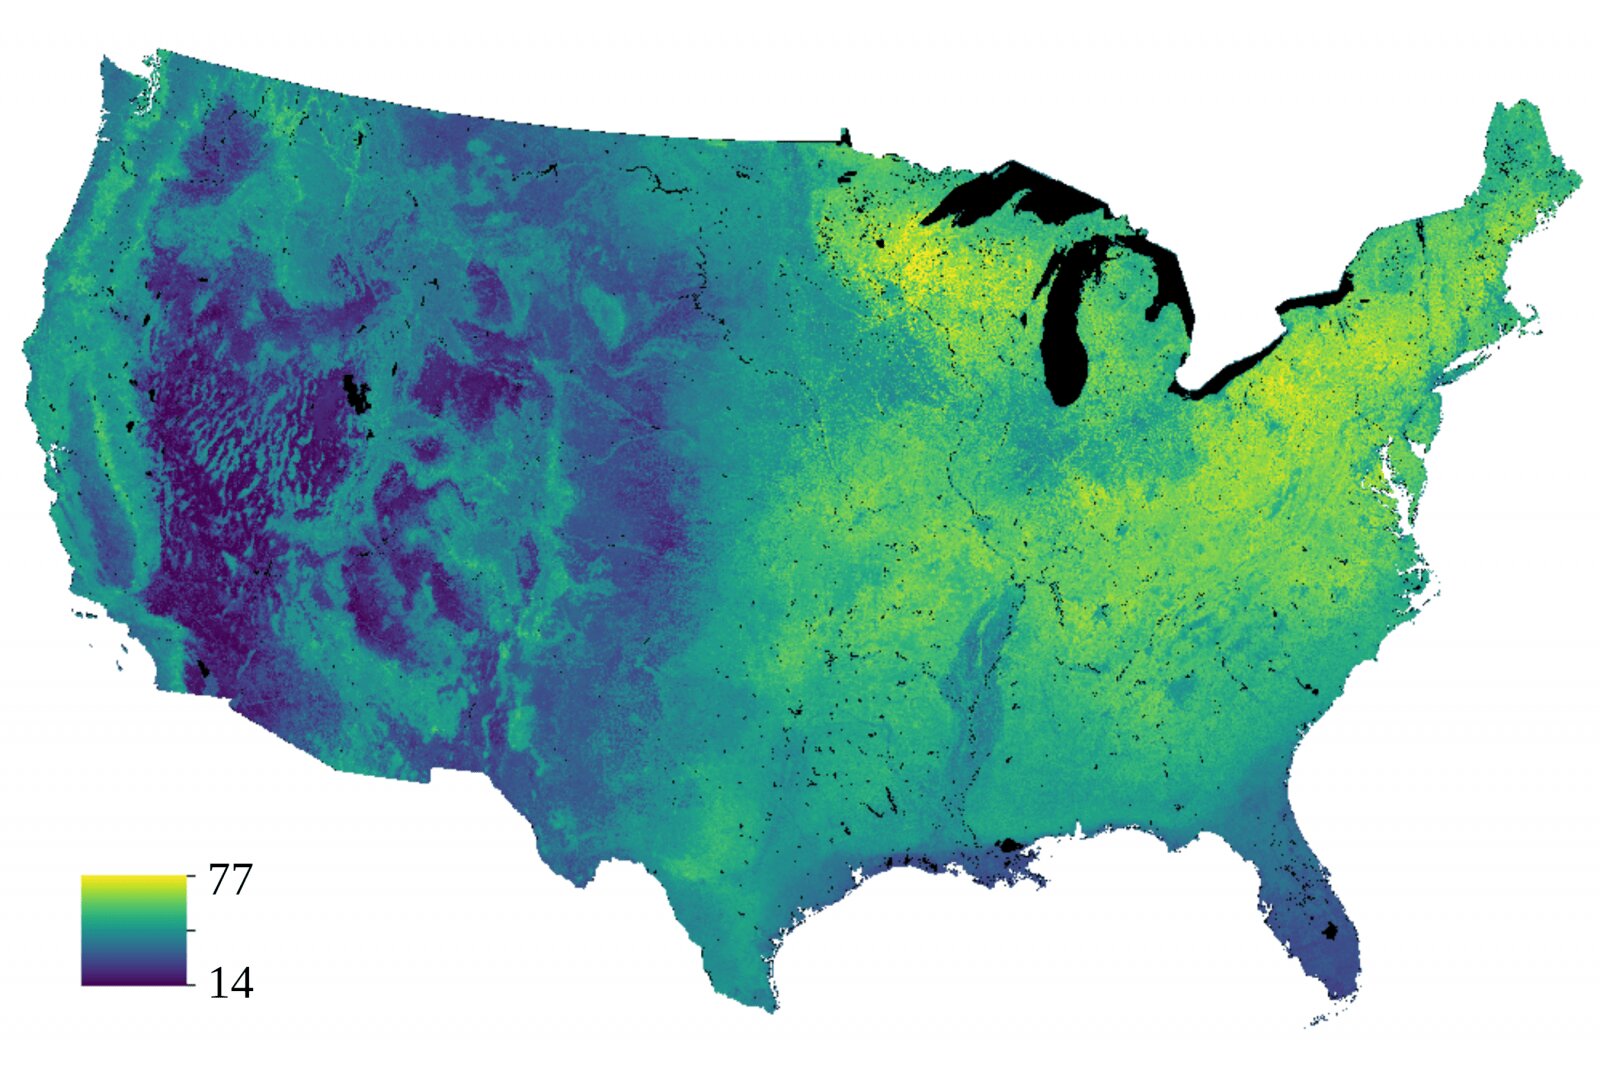 National bird species maps can help protect biodiversity